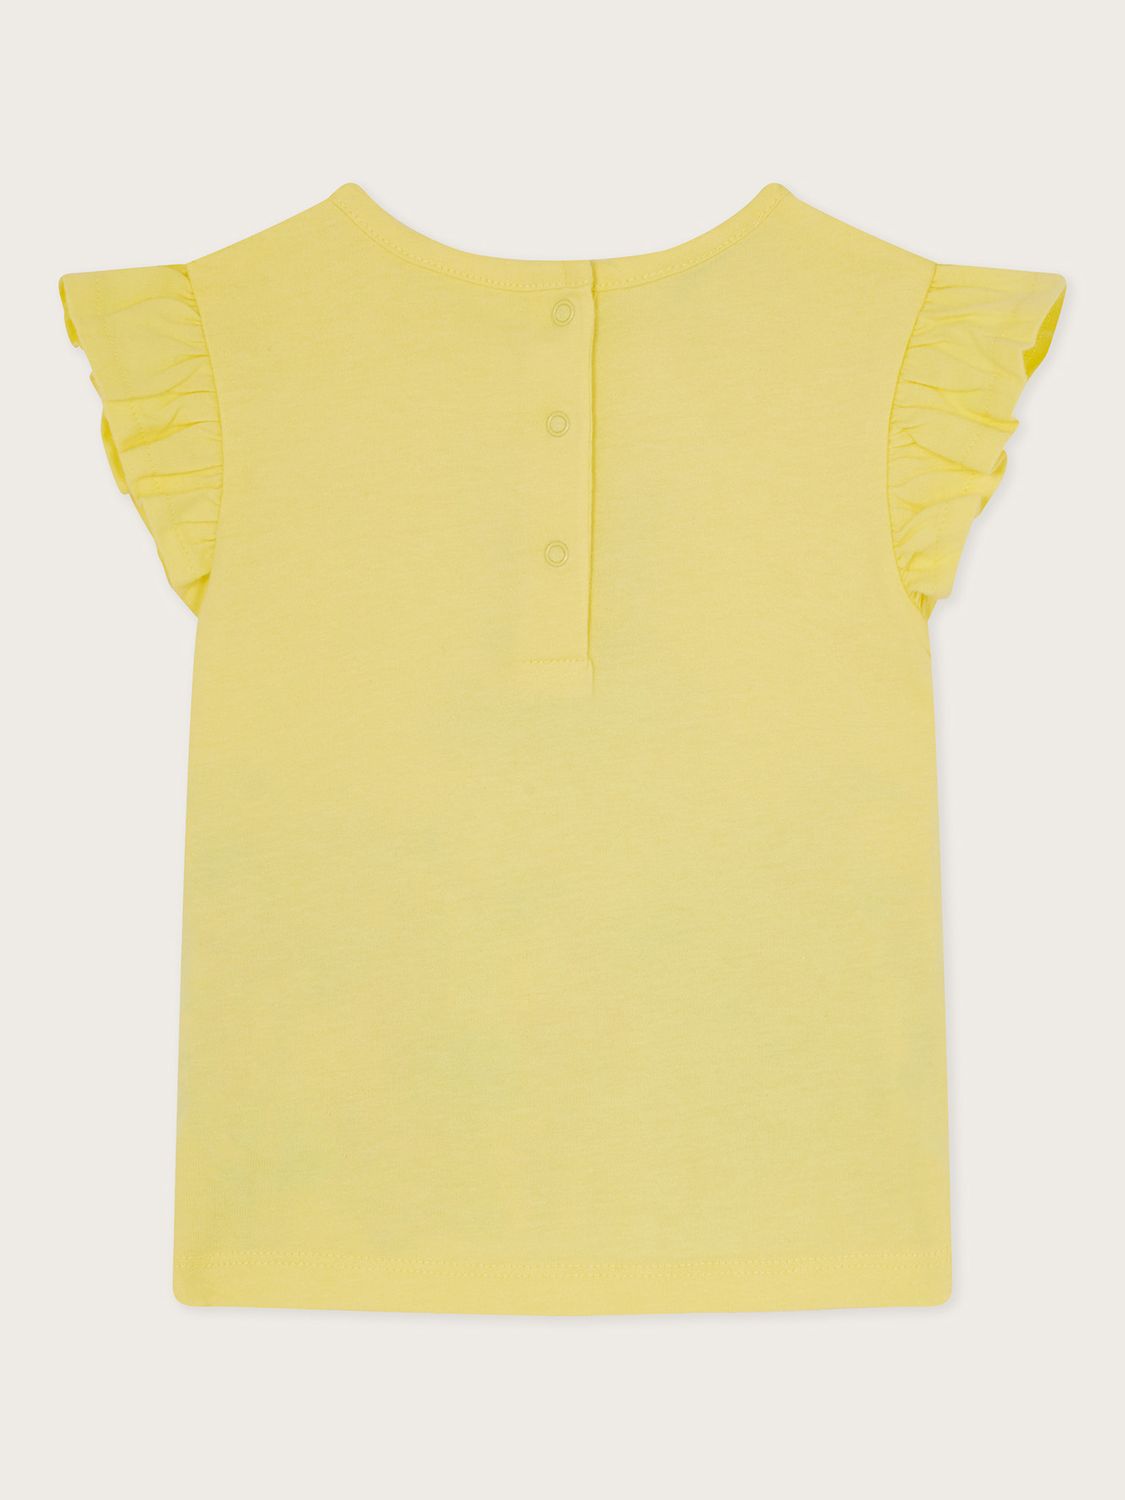 Monsoon Baby Bunny Embroidered T-Shirt, Yellow, 3-6 months